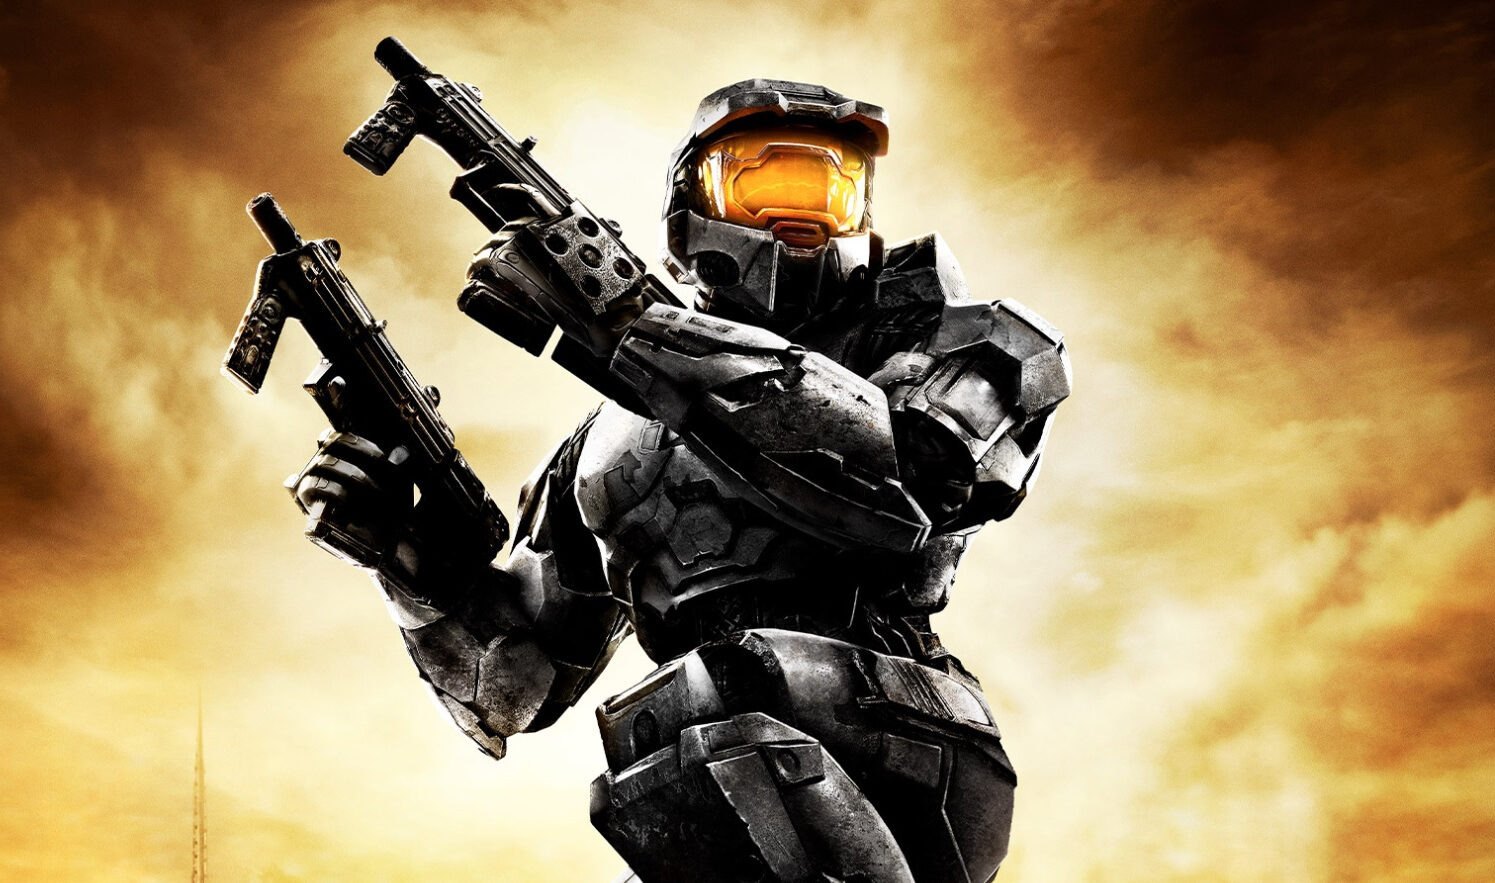 halo 2 pc download free